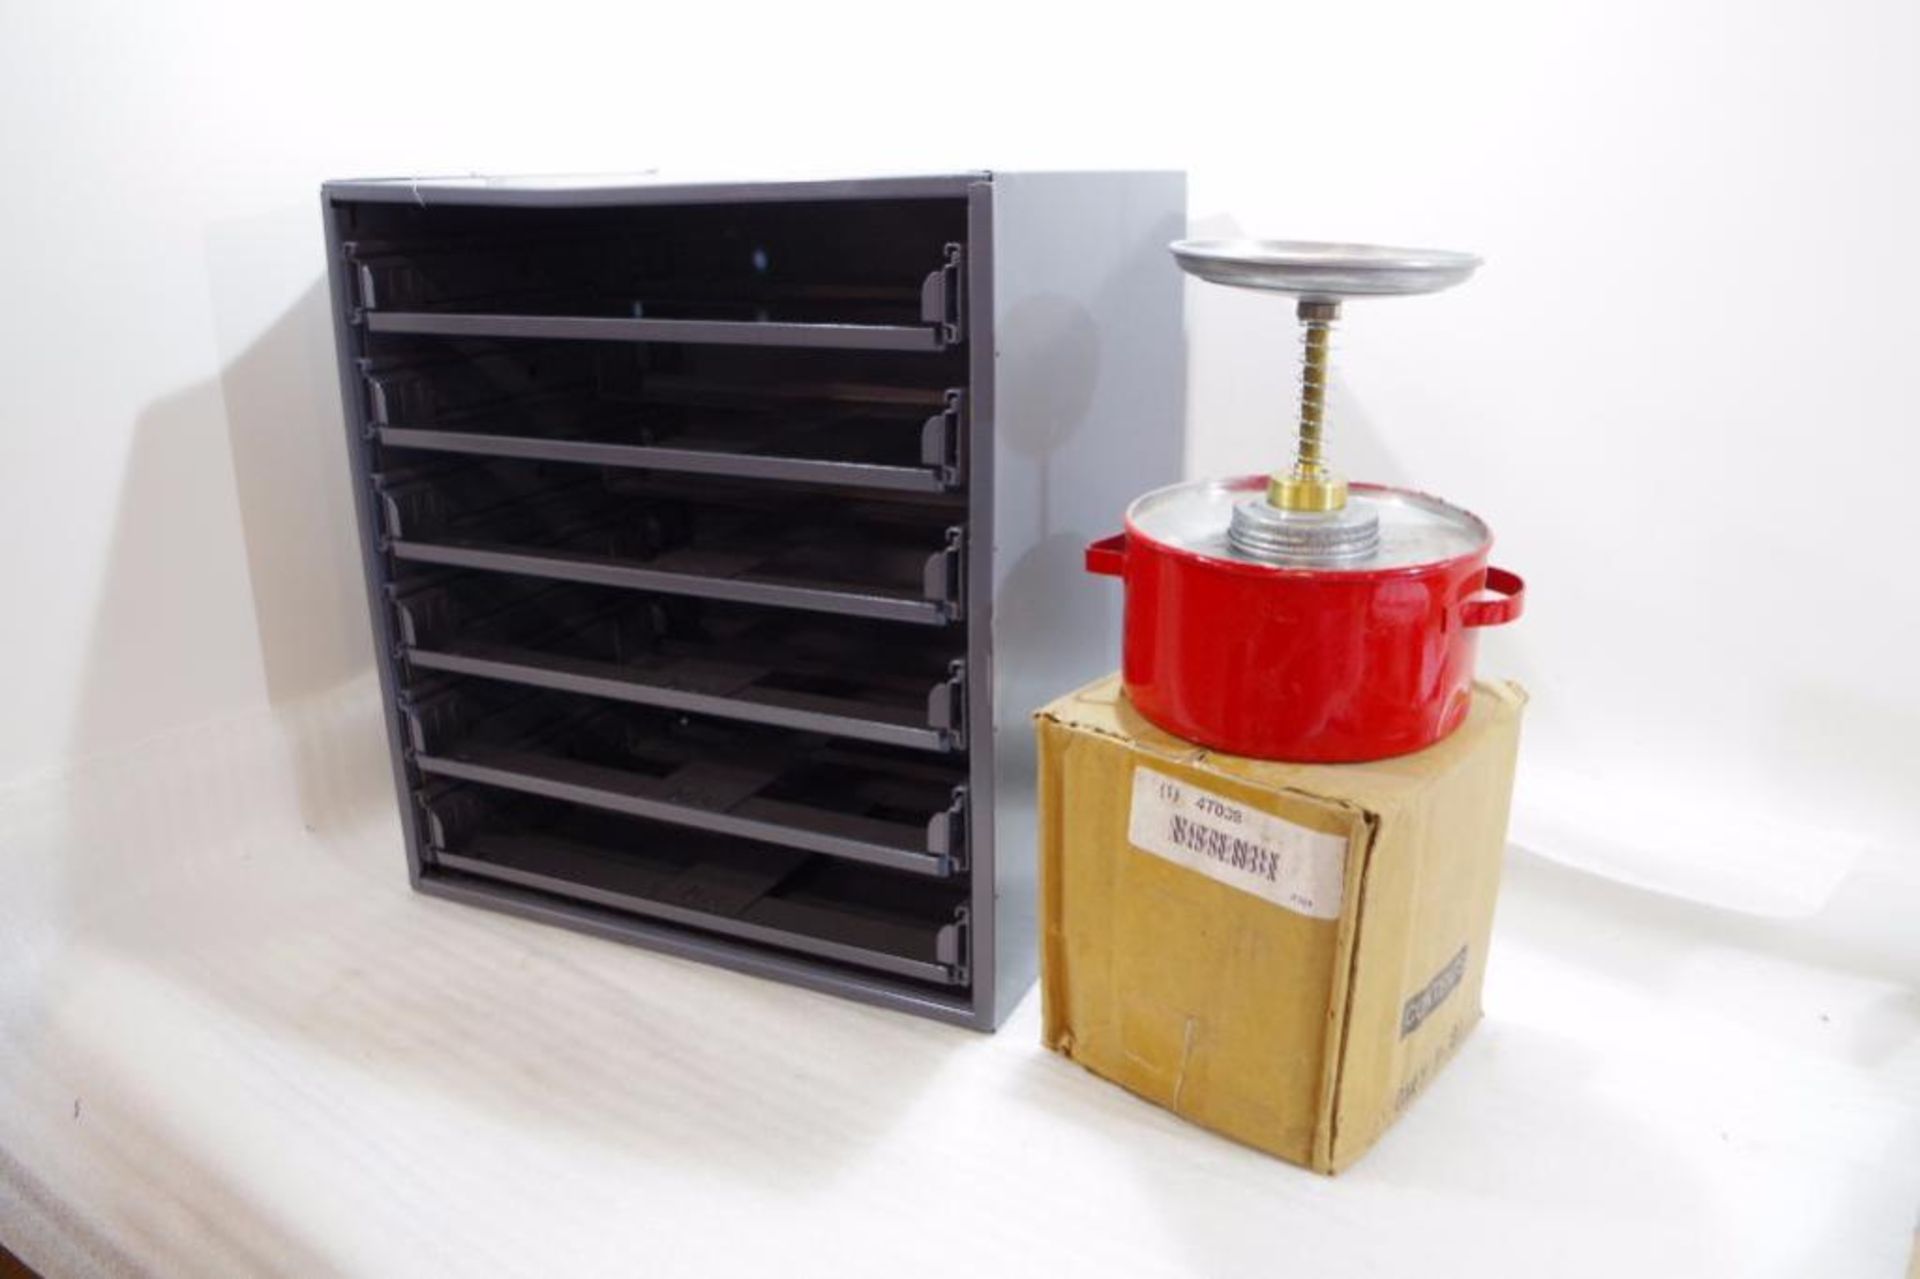 EAGLE 1/4 gal. Plunger Can, 5-1/4" M/N 4TY038 & DURHAM 15"x16"x12" 6-Drawer File